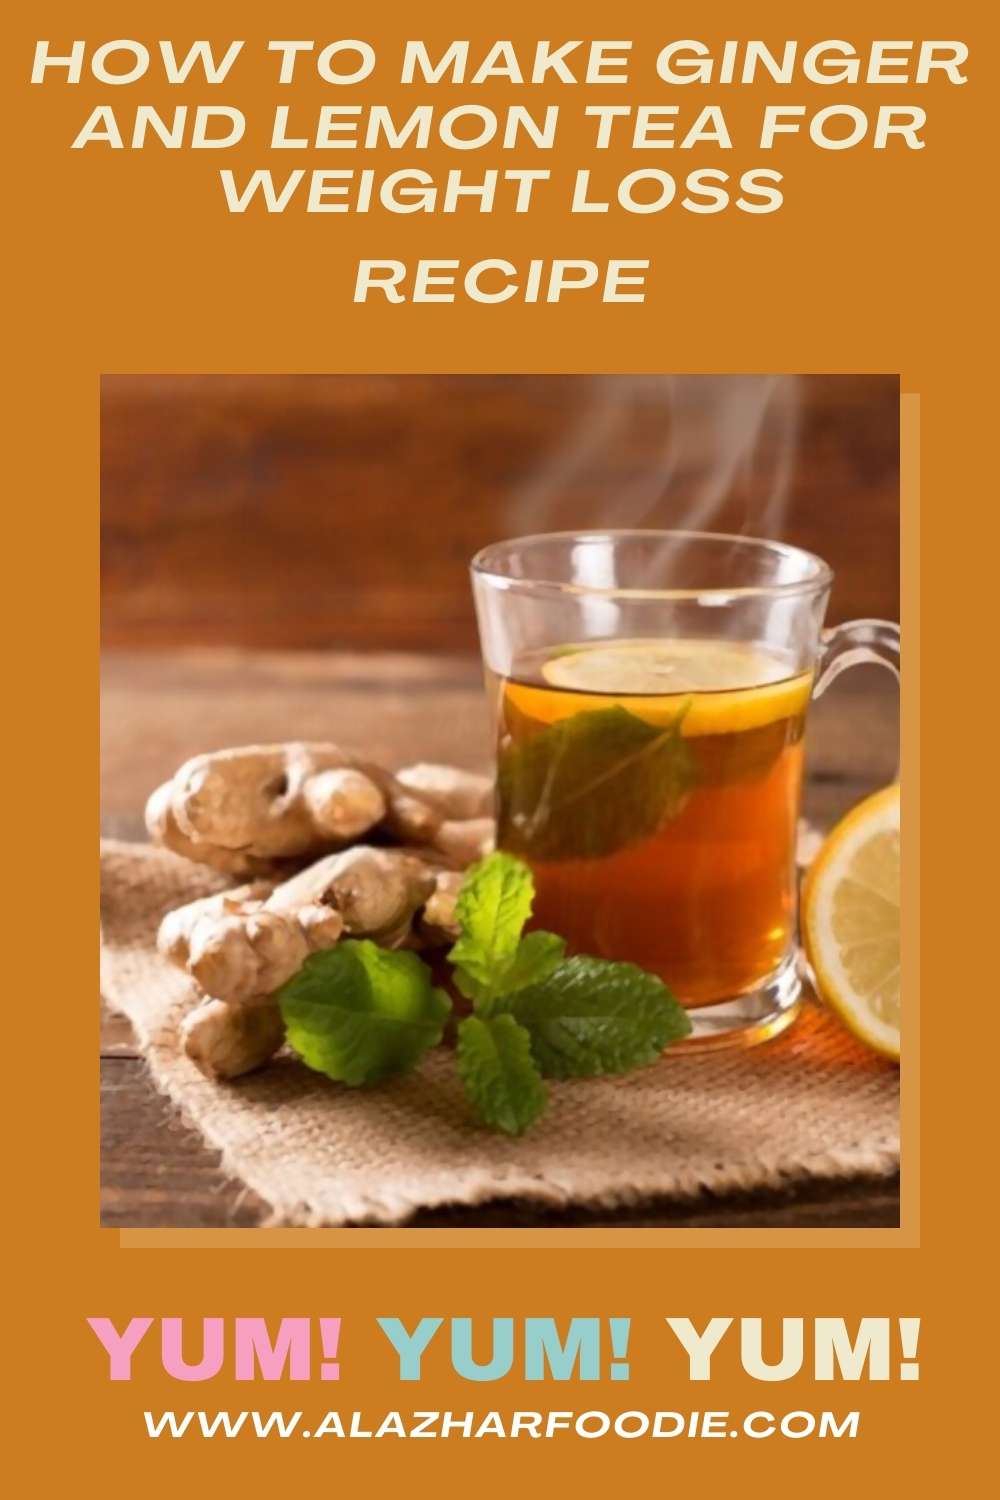 How To Make Ginger And Lemon Tea For Weight Loss?